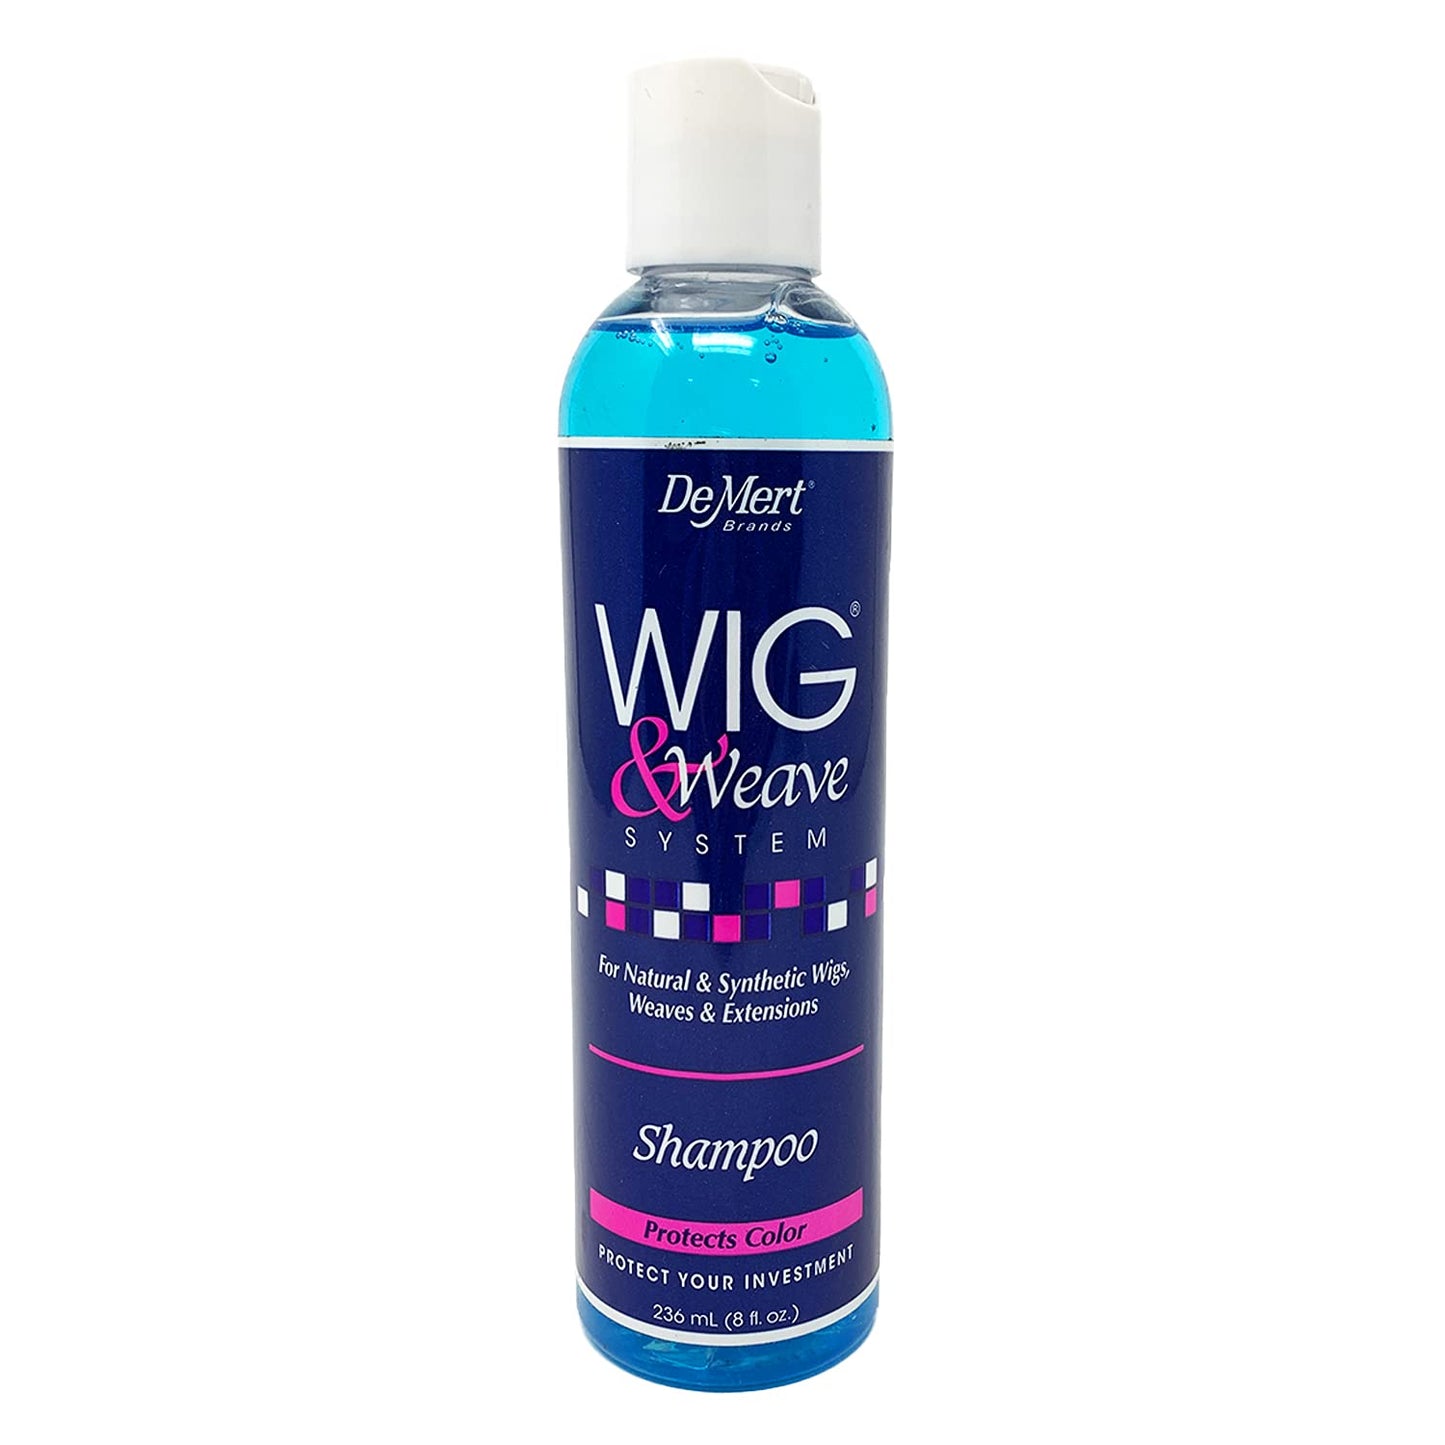 Demert Wig & Weave System Products